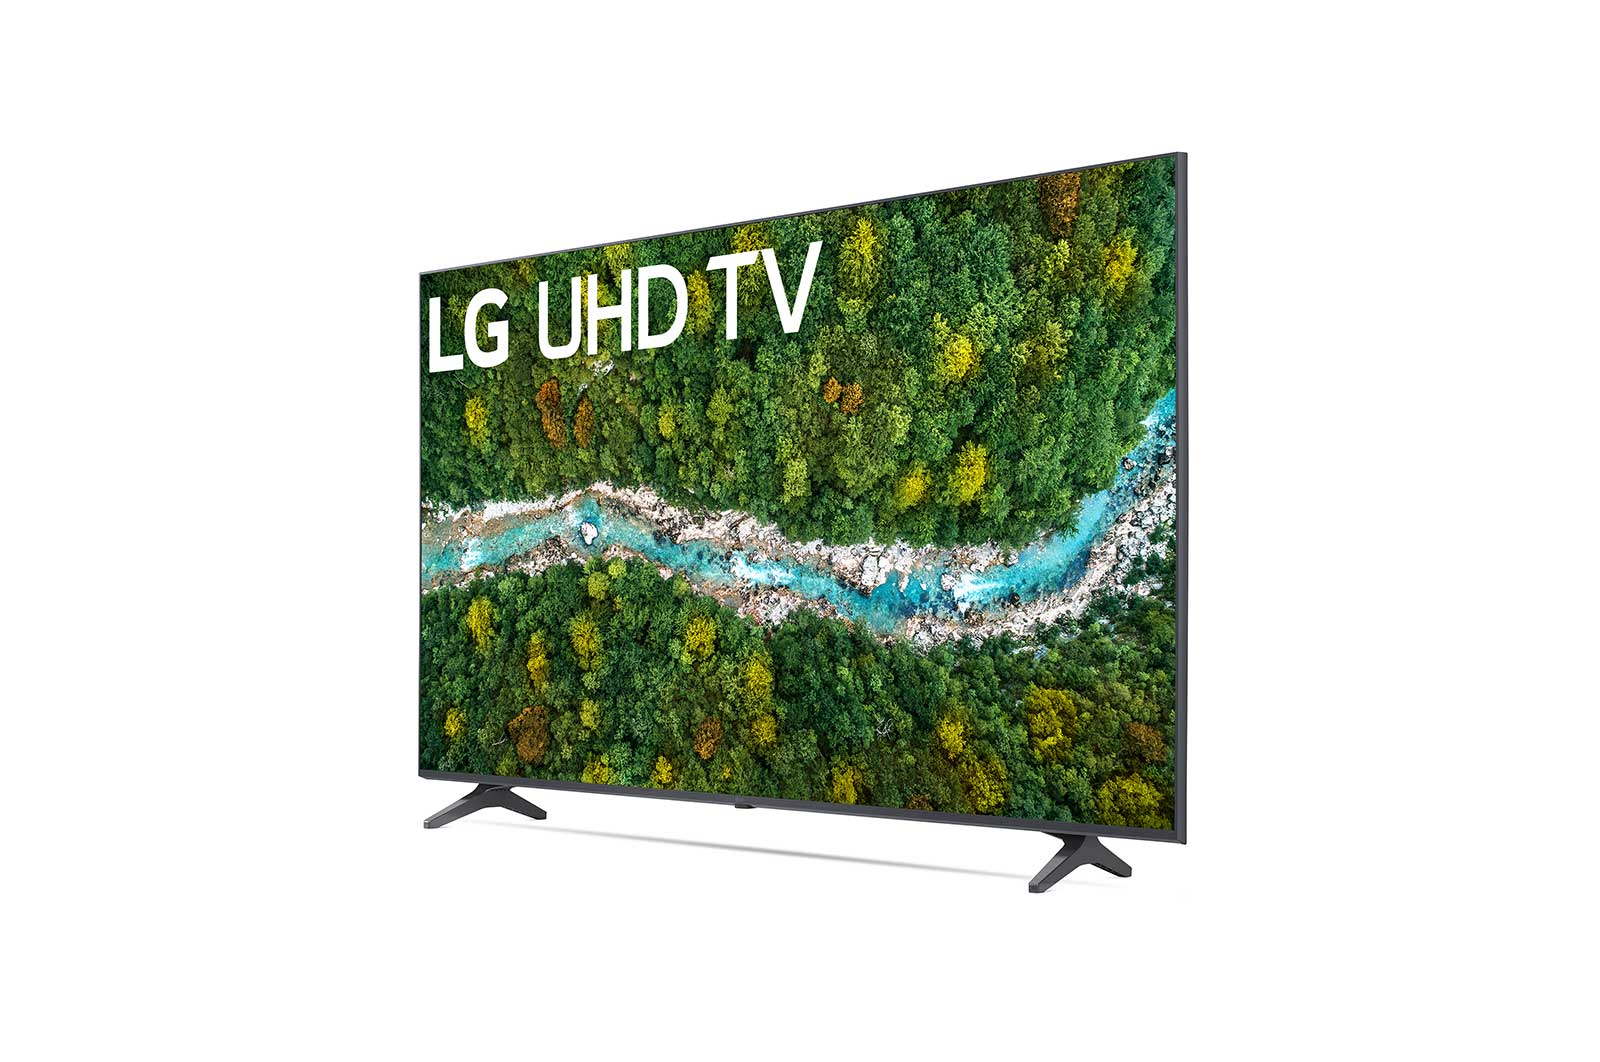 LG 55" 4K Smart UHD TV w/AI ThinQ(Refurbished) Tv's ONLY for delivery in San Diego and Tijuana